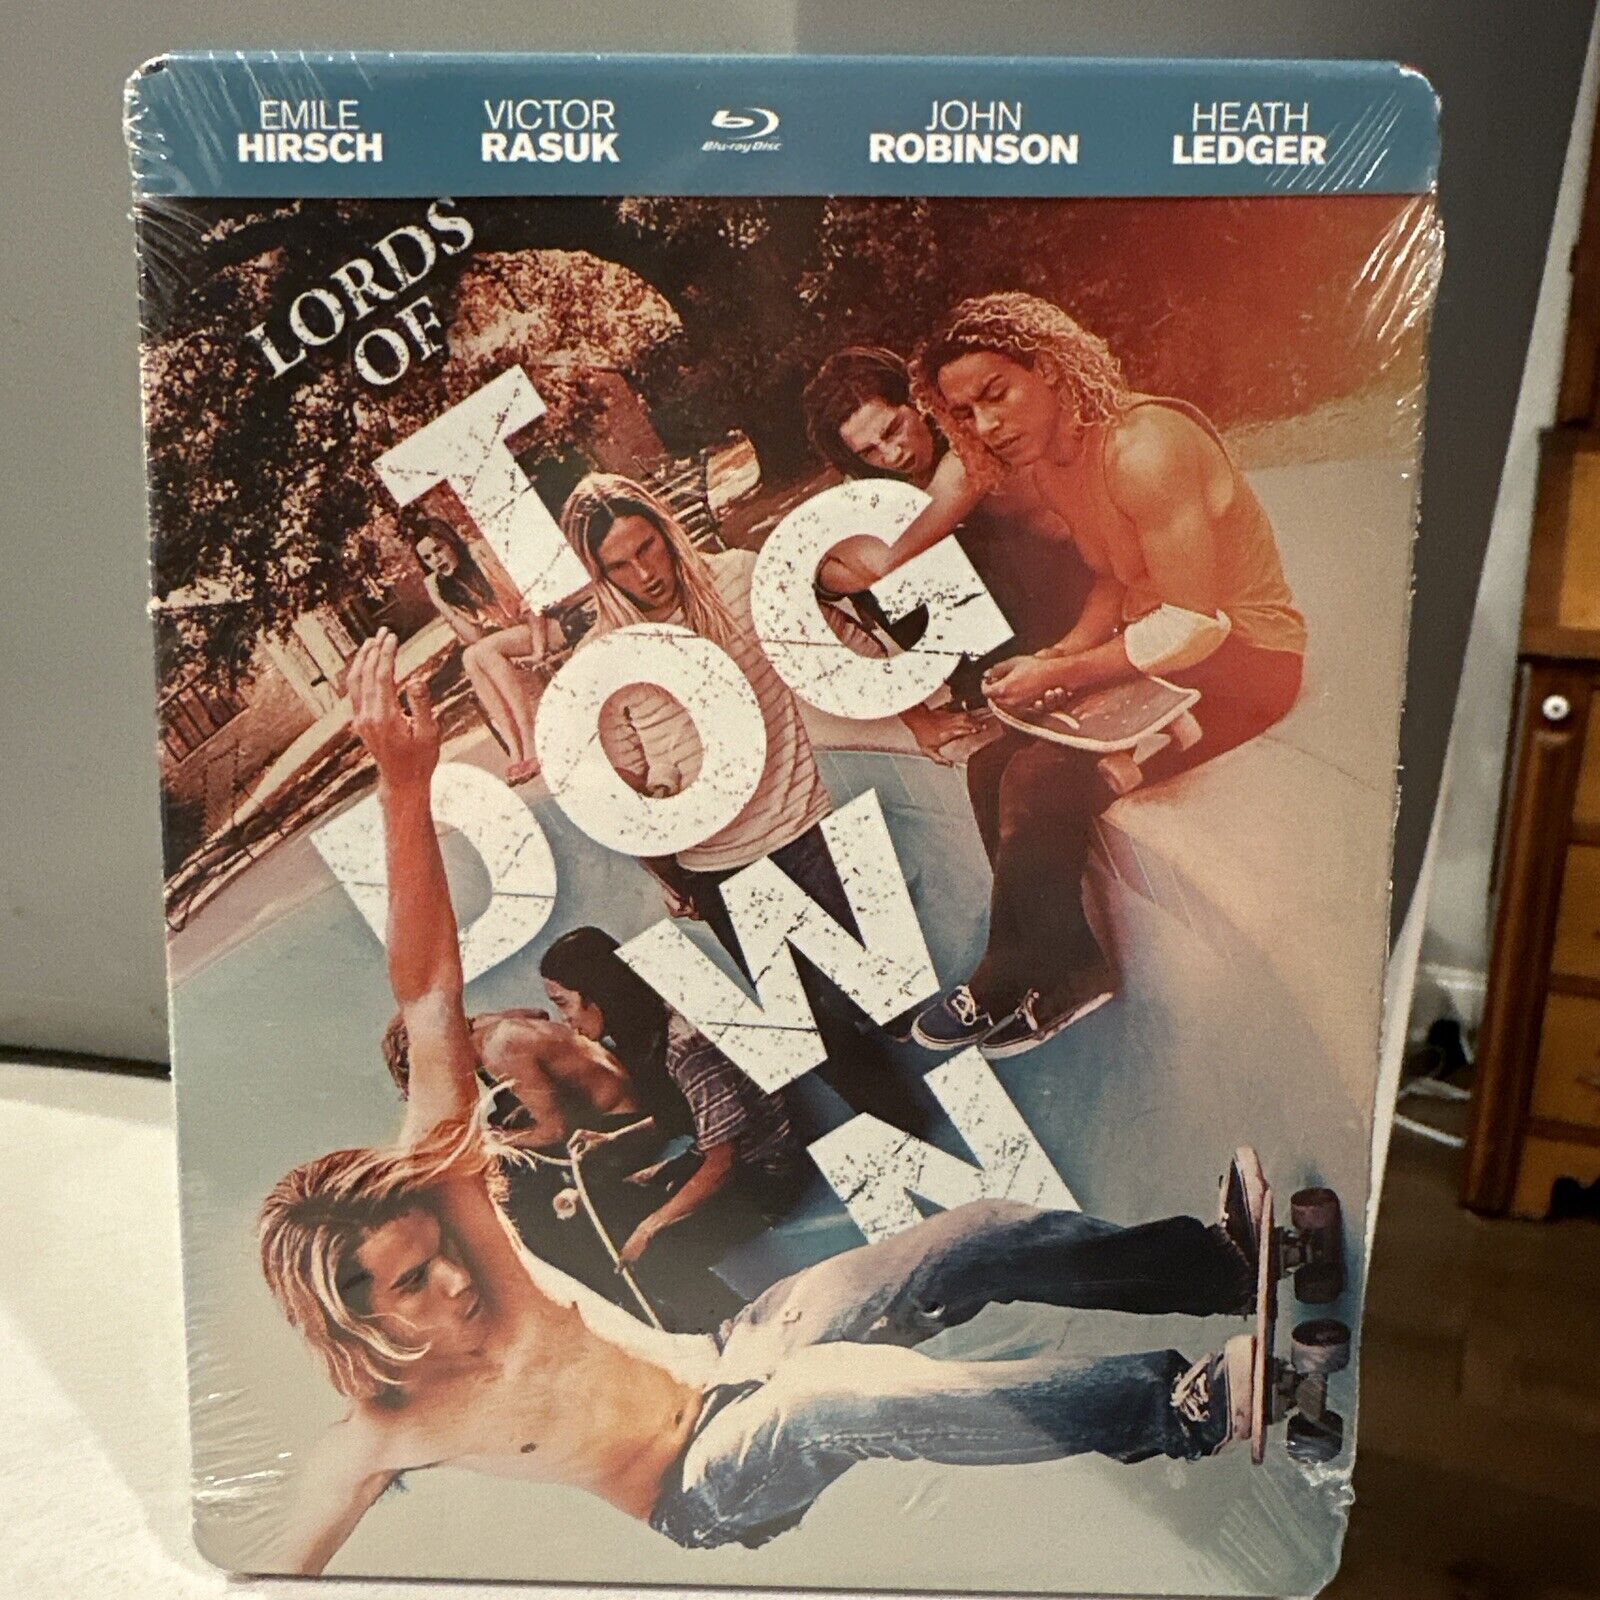 Mill Creek Entertainment Lords of Dogtown Limited Edition (Blu-ray) New & Sealed